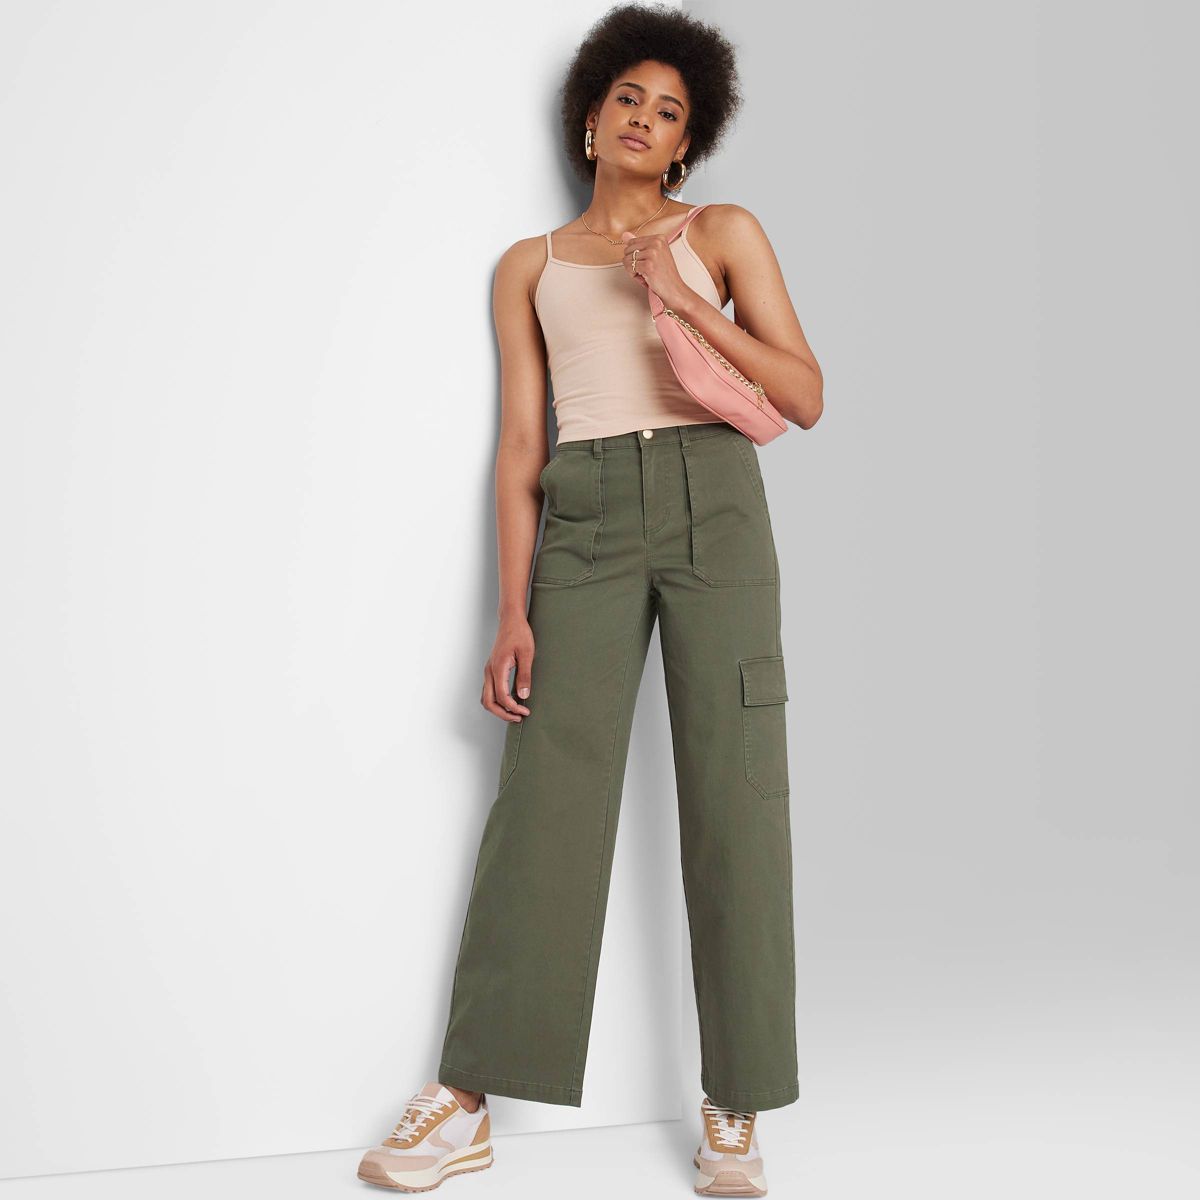 Women's High-Rise Straight Leg Cargo Pants - Wild Fable™ Olive Green L | Target